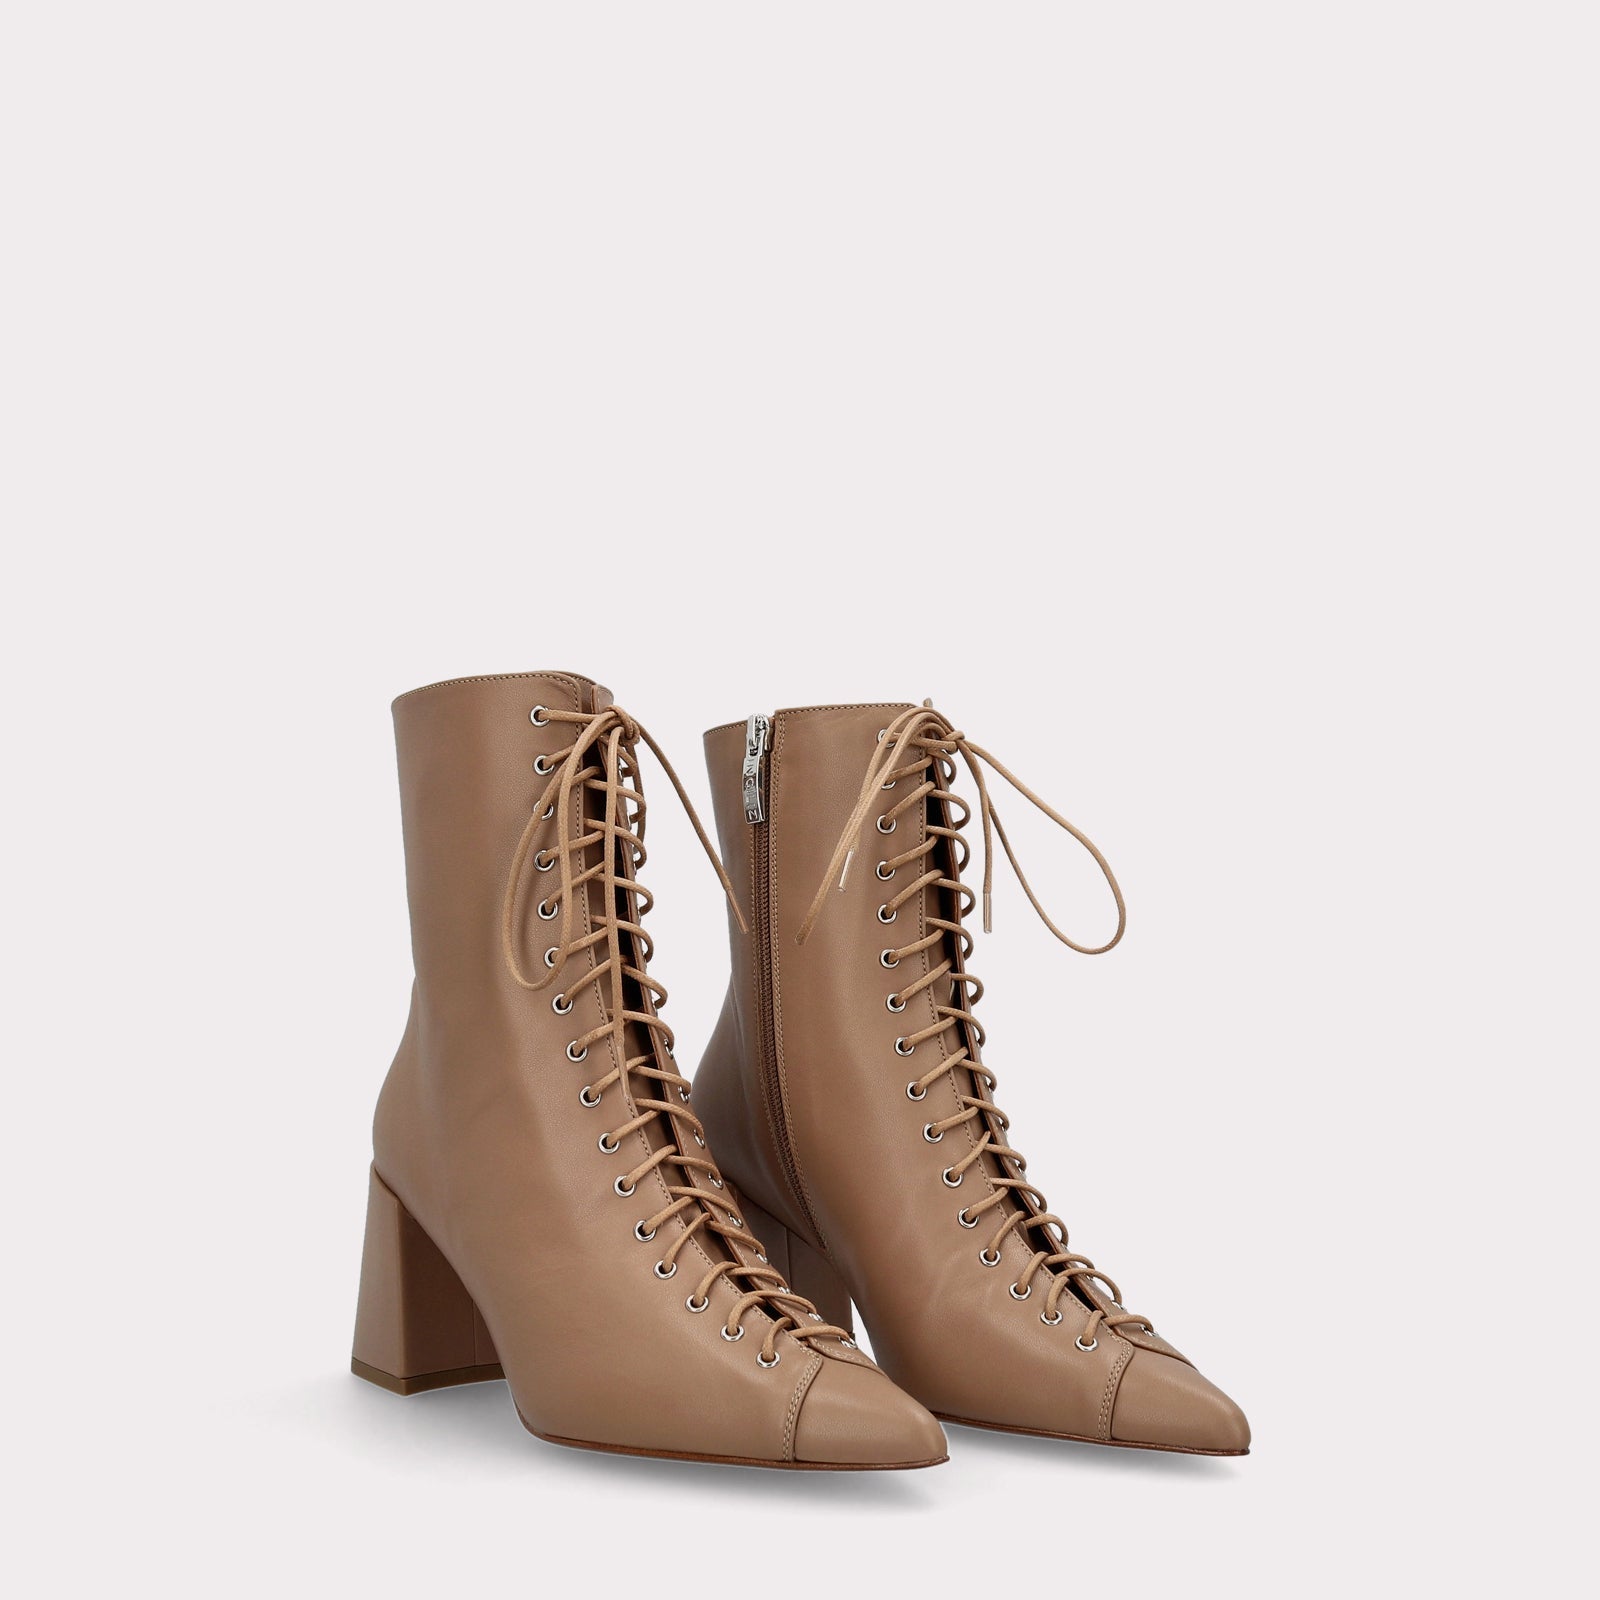 JOLIE 01 NUDE LEATHER ANKLE BOOTS